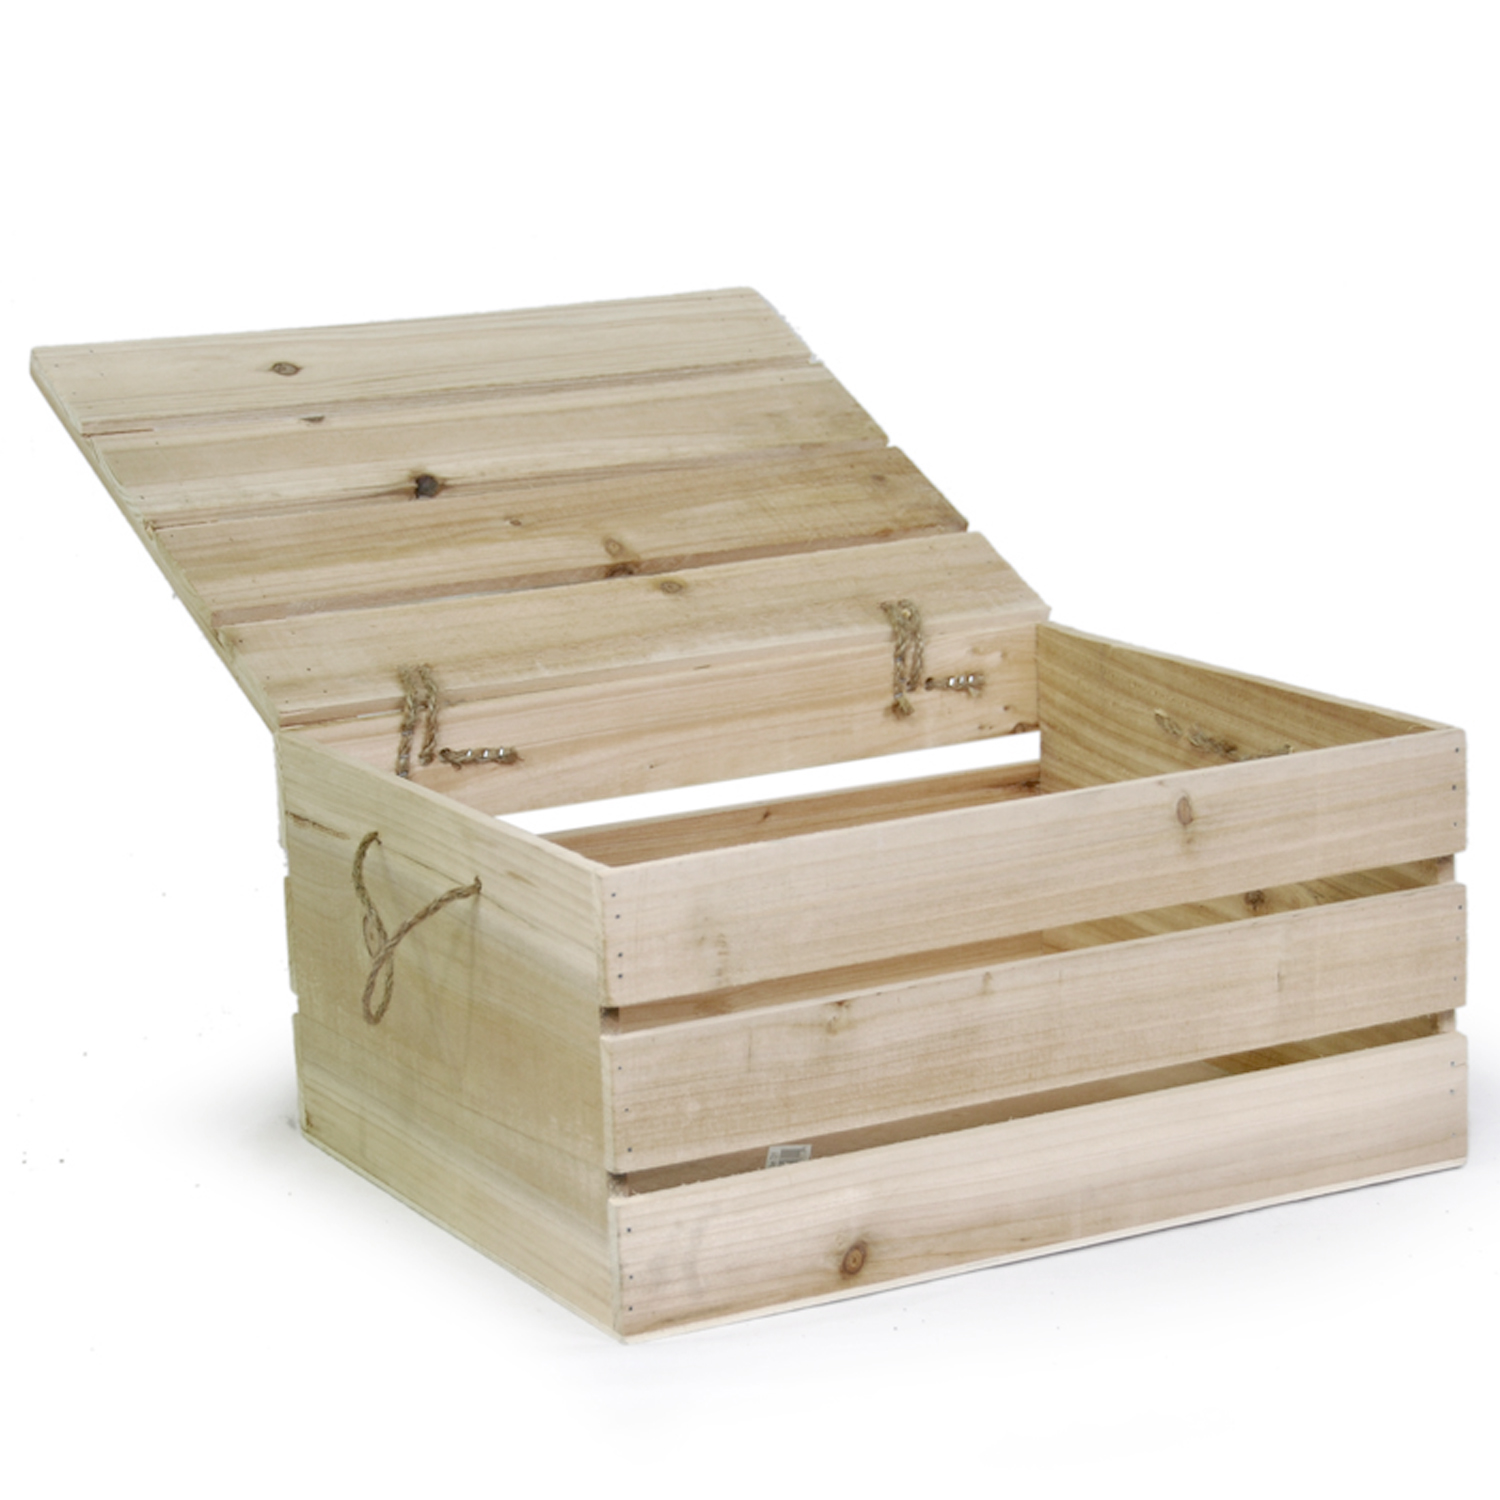 Natural Wooden Crate Storage Box with Lid - Large 15in